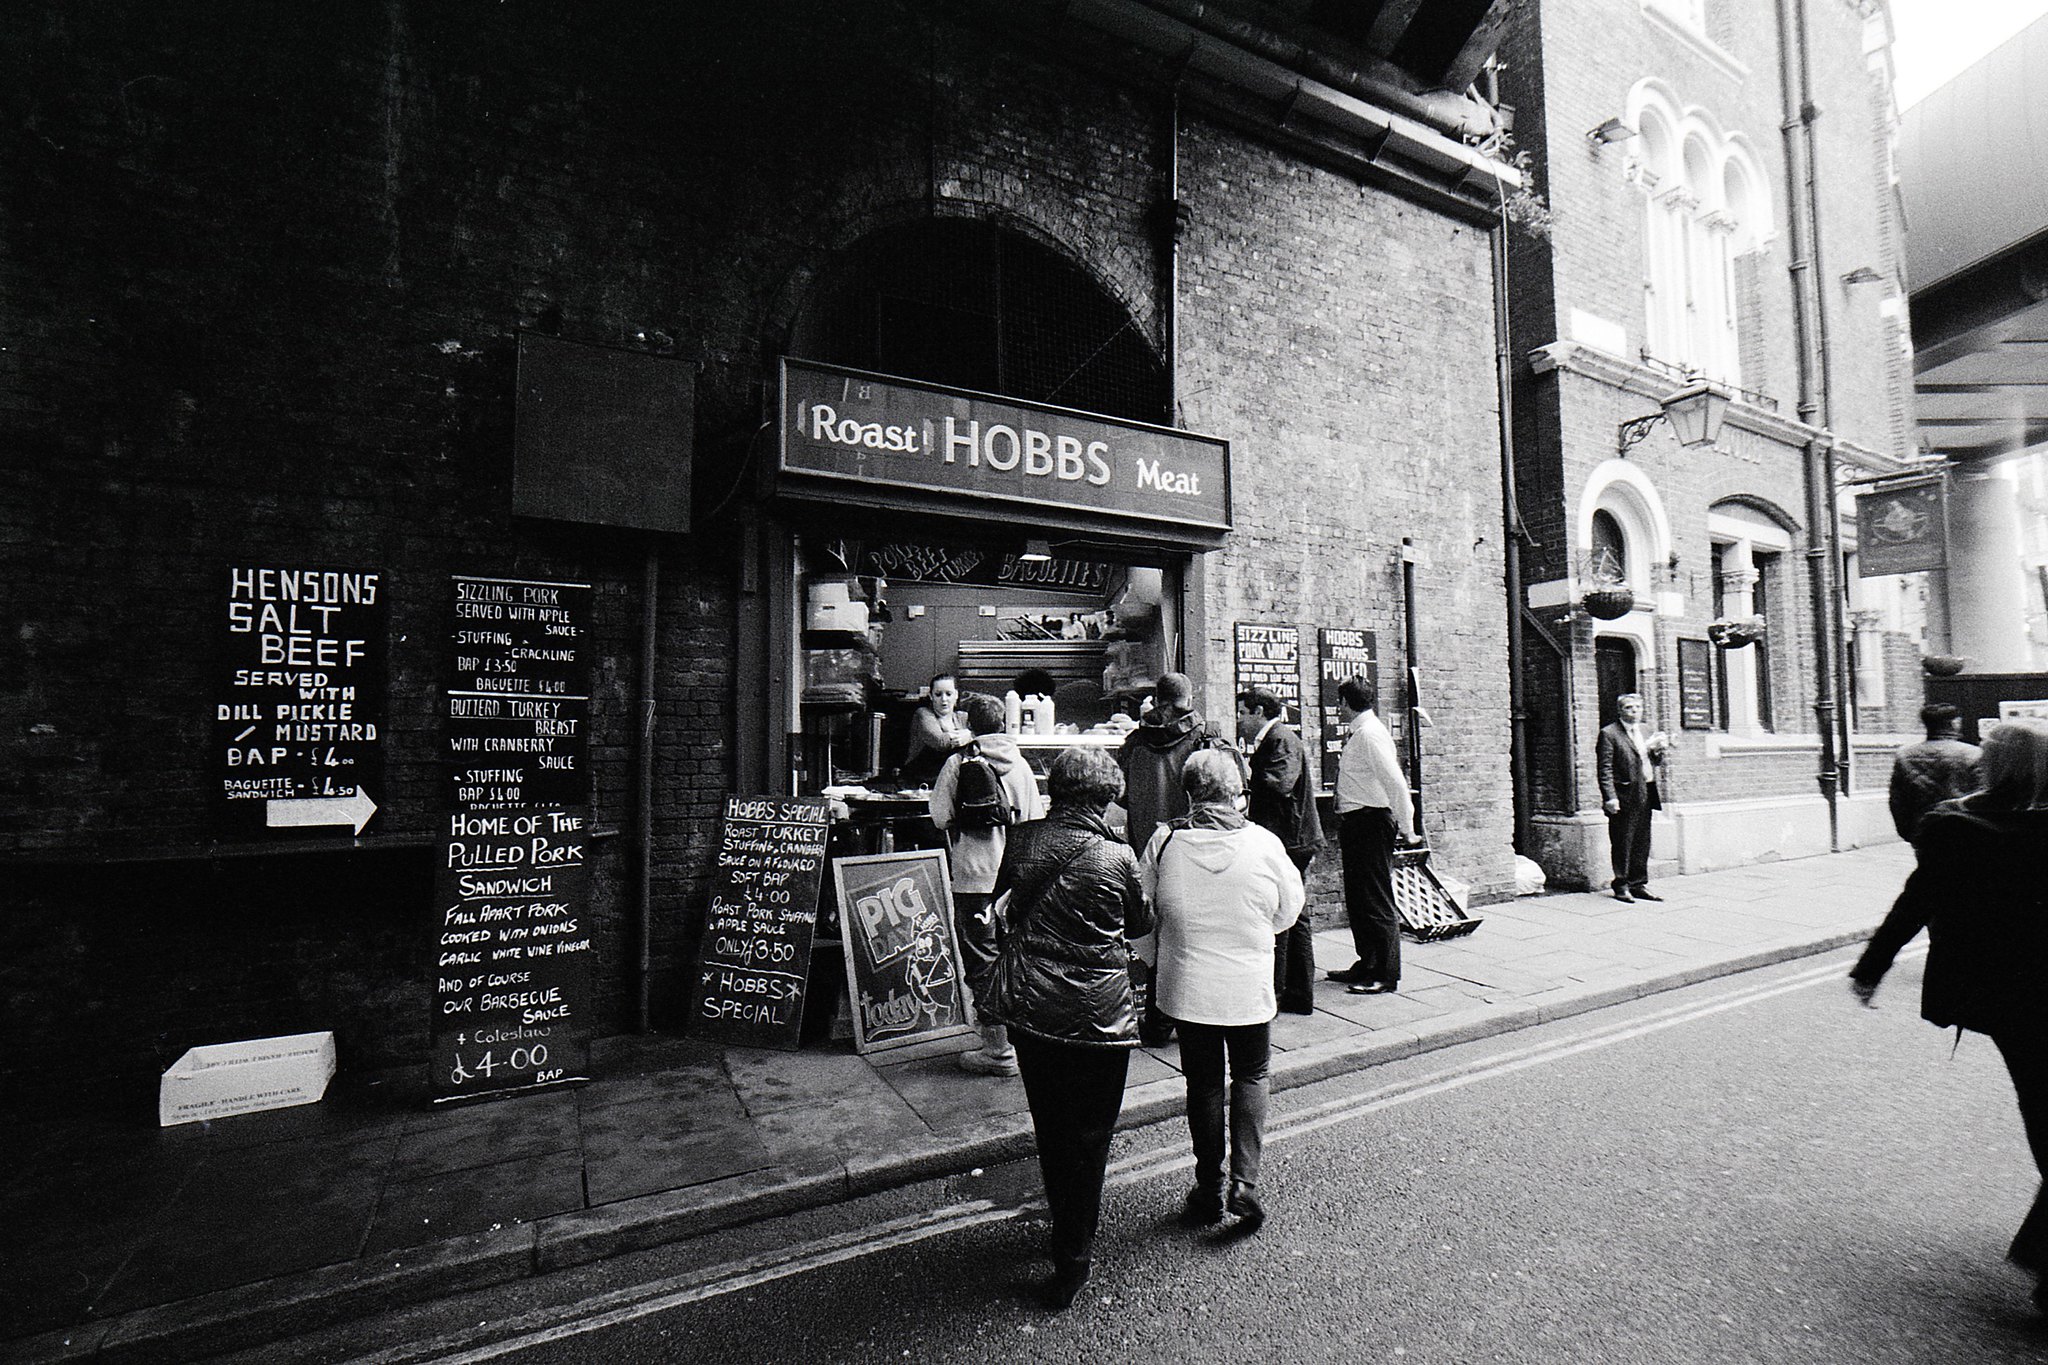 Photo Example of Kentmere 400